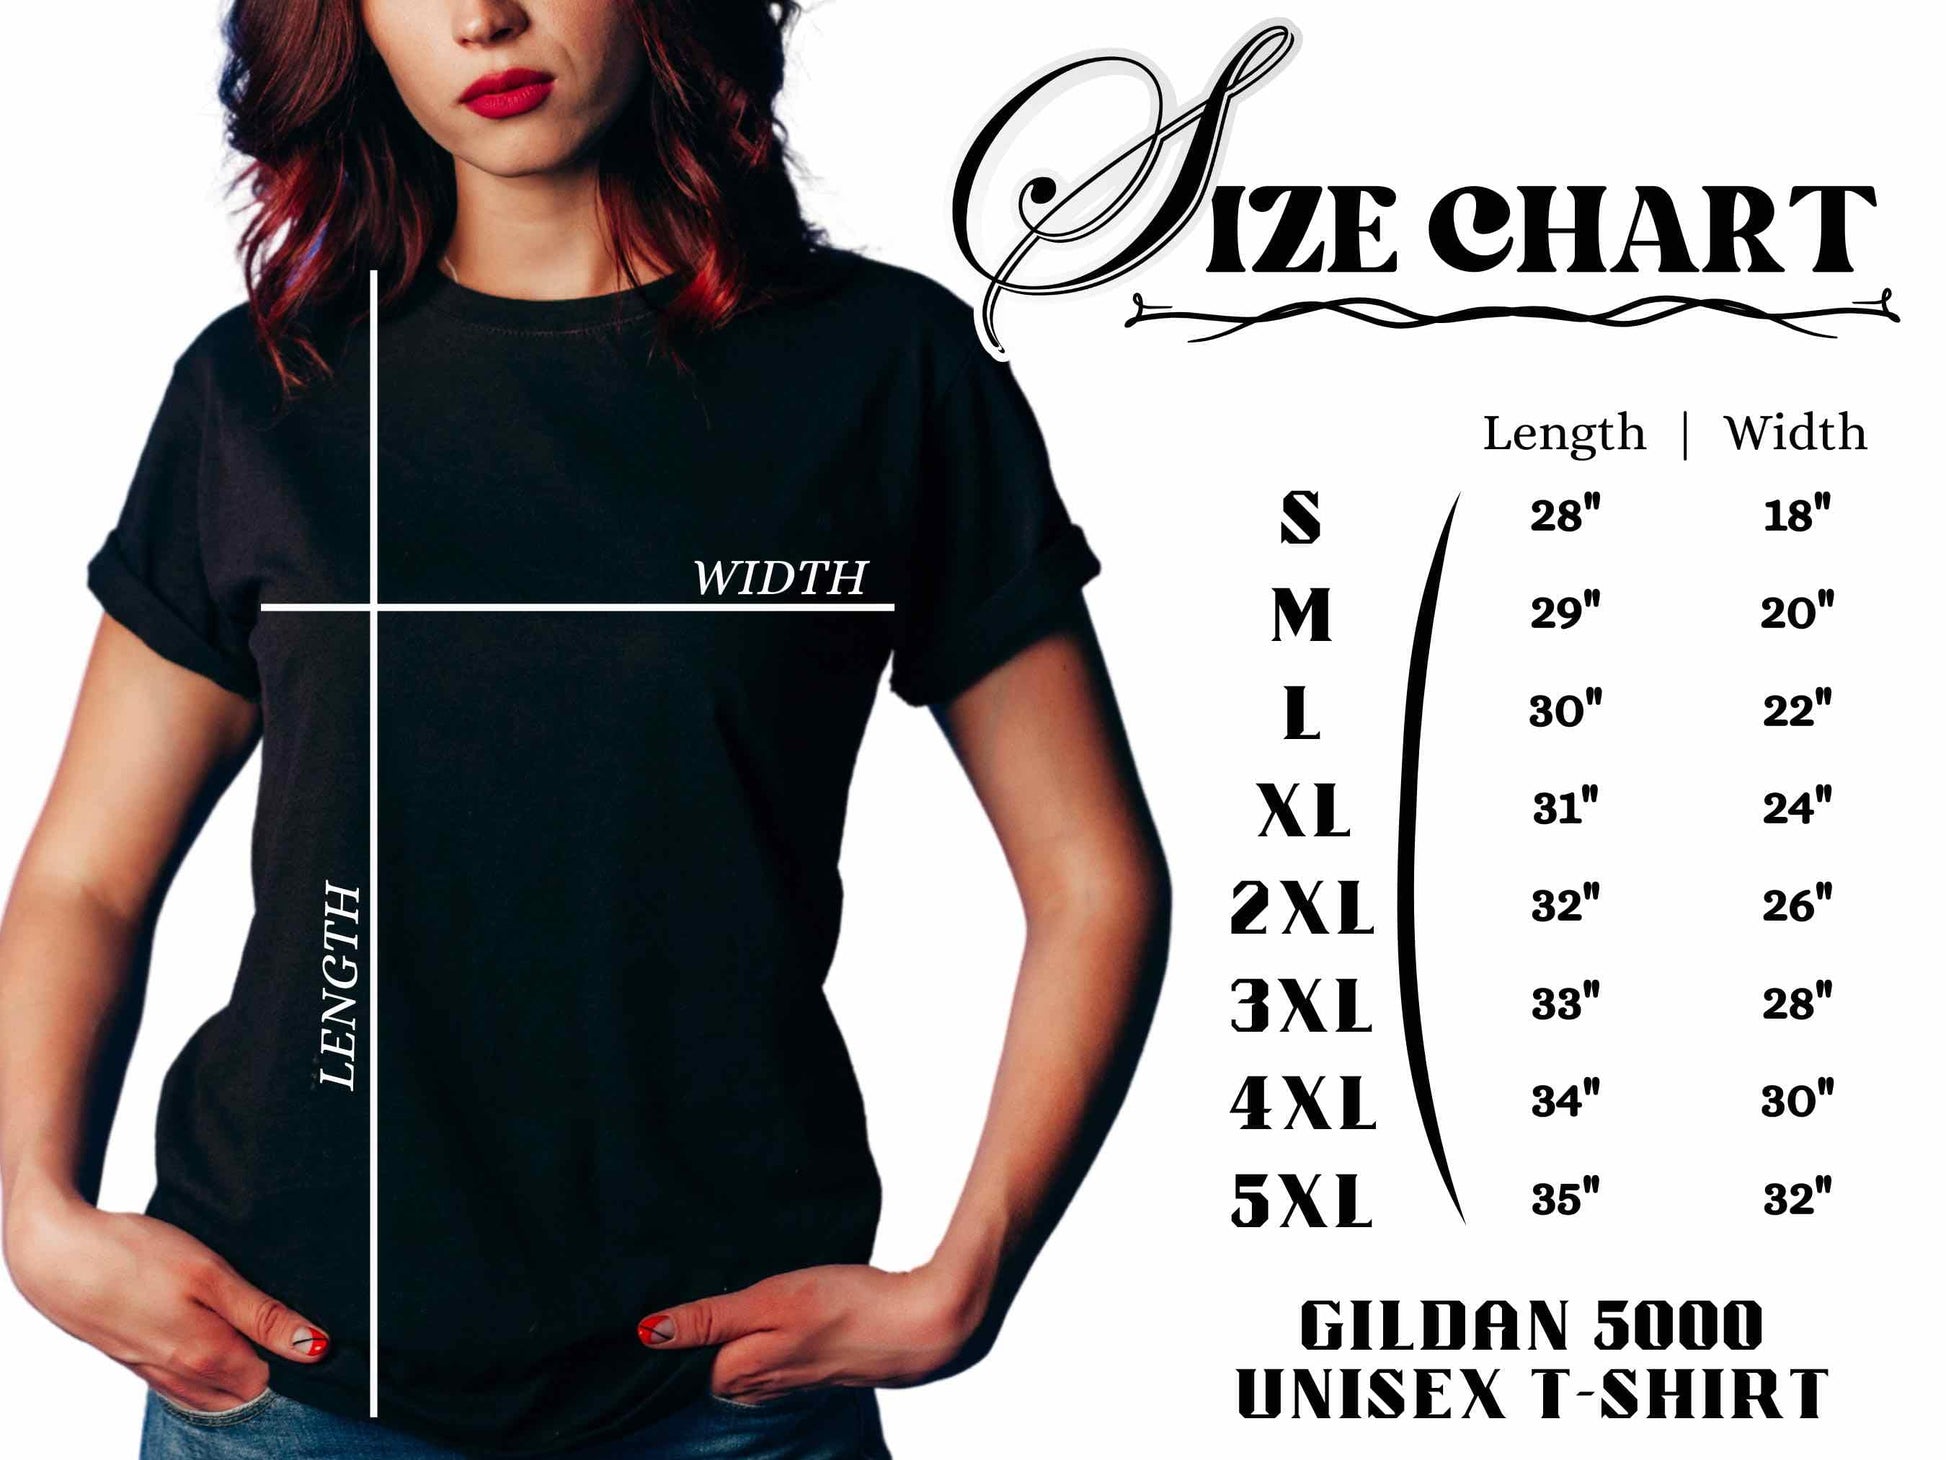 size chart for black gildan 5000 t-shirt in inches